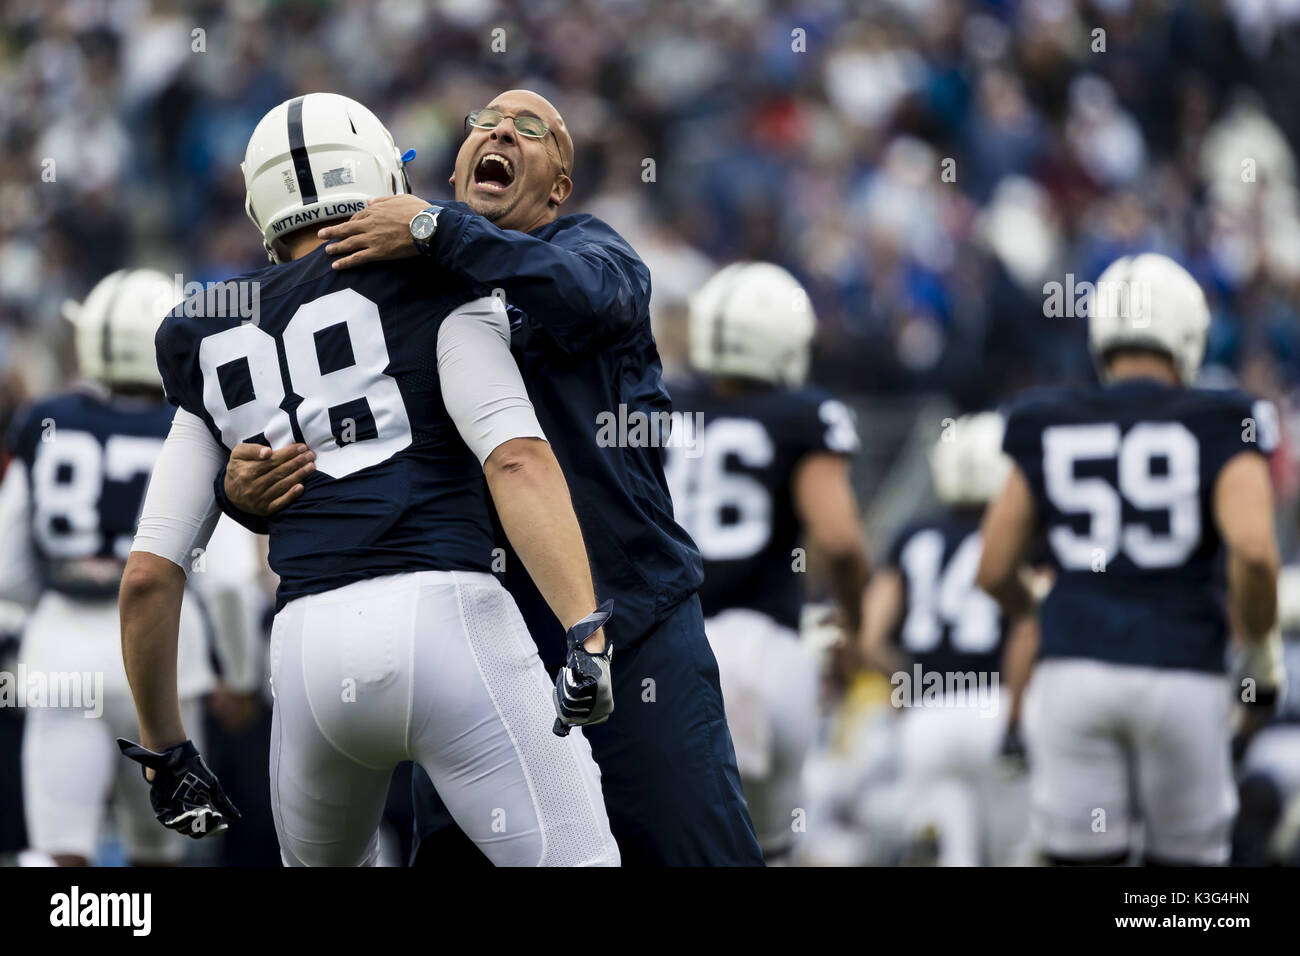 University Park, Pennsylvania, USA. 2nd Sep, 2017. September 02, 2017: Penn State Nittany Lions head coach James Franklin hugs Penn State Nittany Lions tight end Mike Gesicki (88) as they take the field during the NCAA football game between Penn State Nittany Lions and Akron Zips at Beaver Stadium in University Park, Pennsylvania. Credit: Scott Taetsch/ZUMA Wire/Alamy Live News Stock Photo